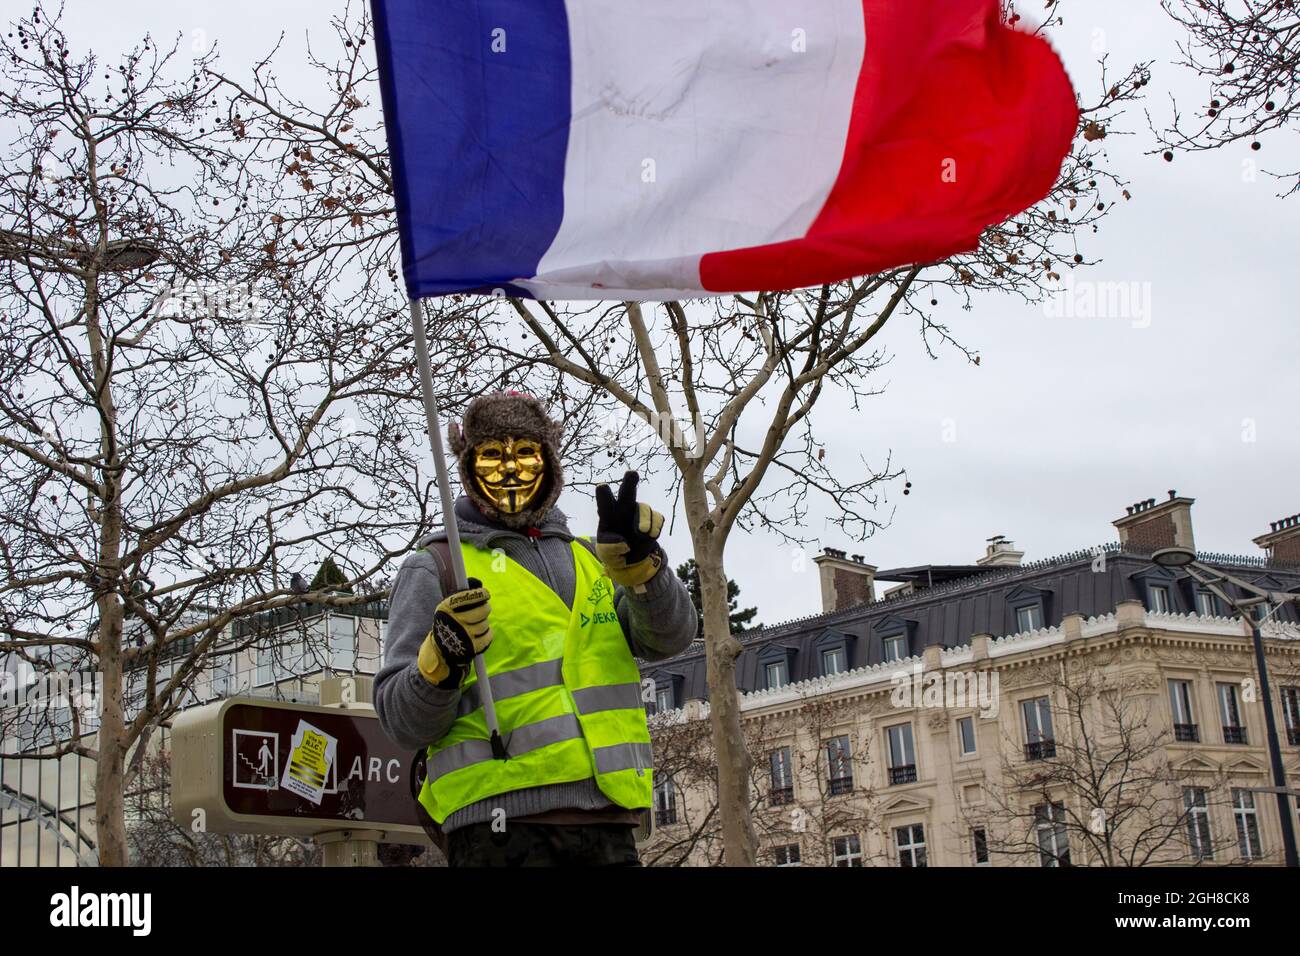 Leader of the Gilets jaunes - Yellow vests protest movement - Paris, France - 19.01.2019 Stock Photo